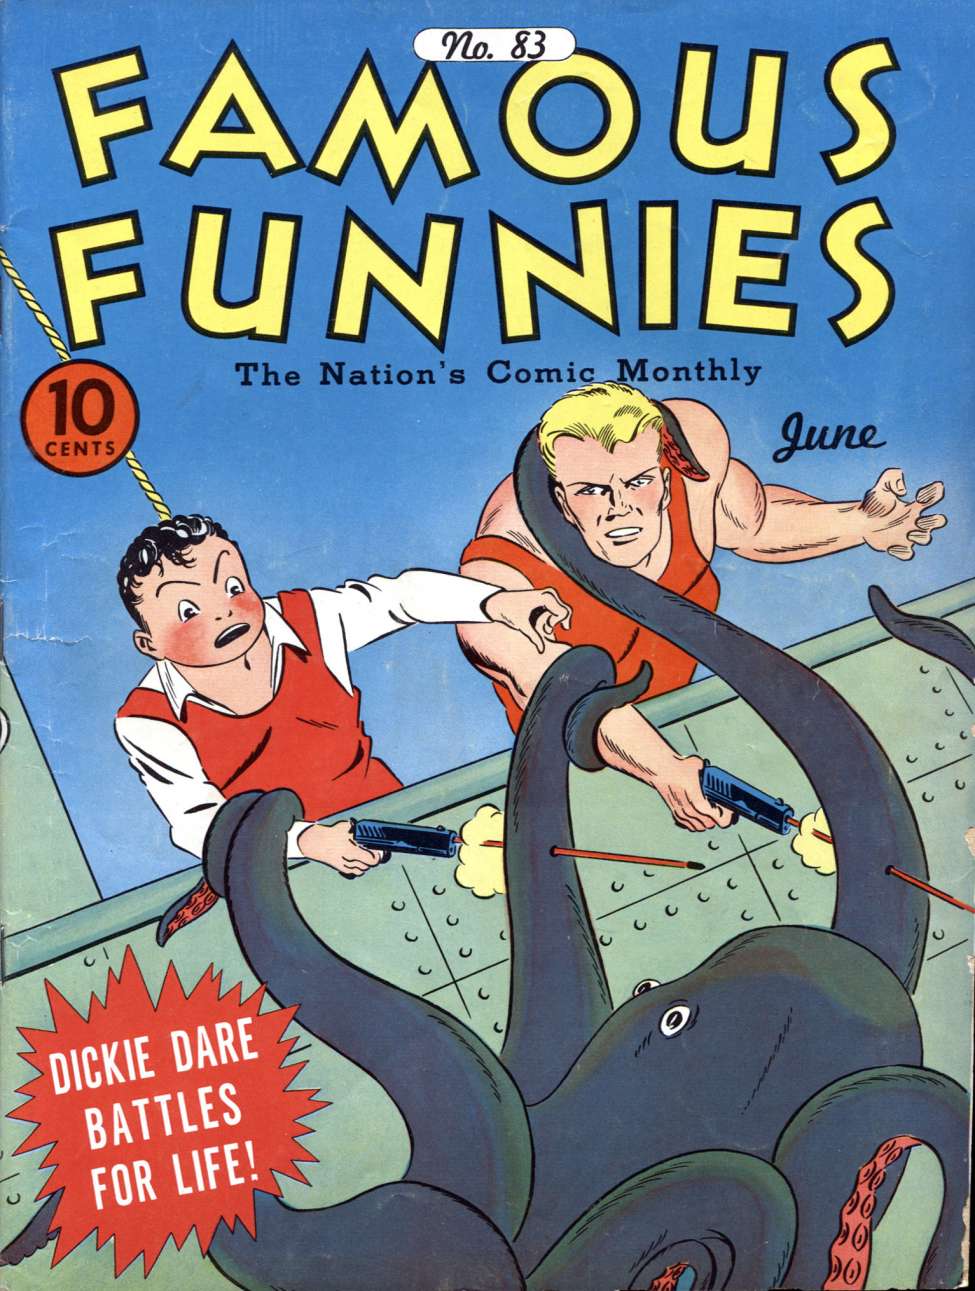 Book Cover For Famous Funnies 83